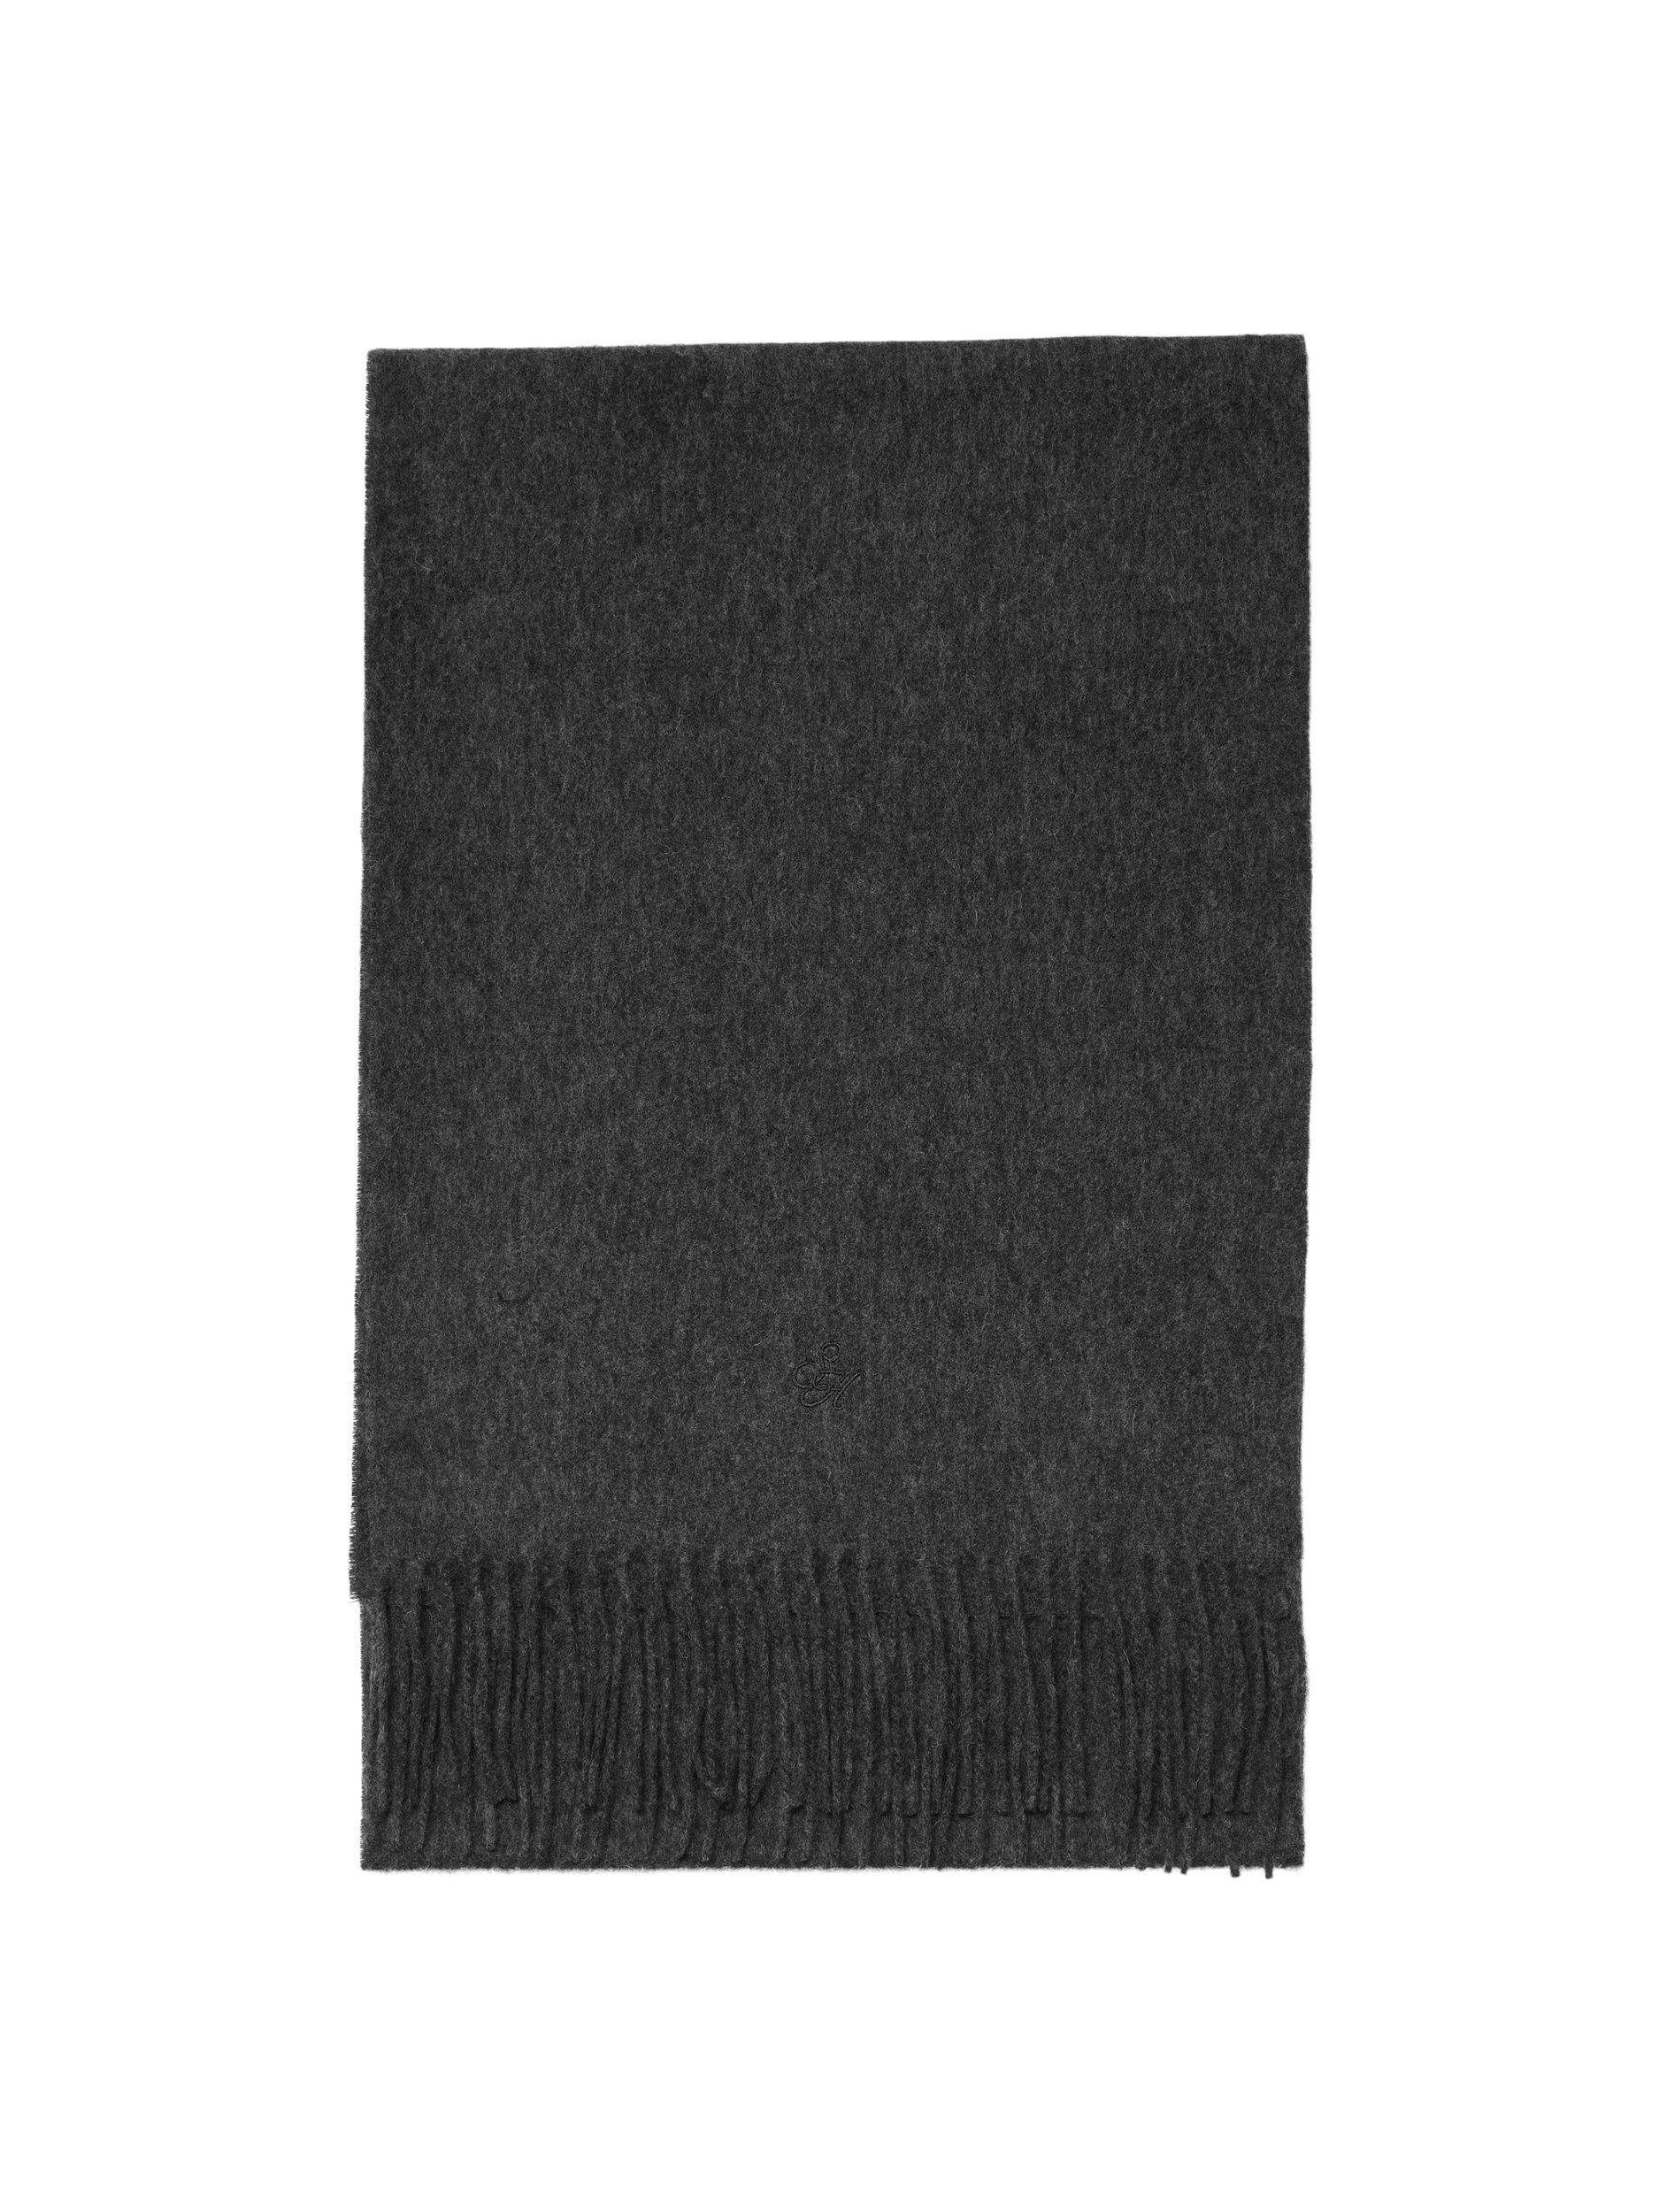 SELECTED HOMME Schal SLHTOPE WOOL SCARF B grau | Modeschals